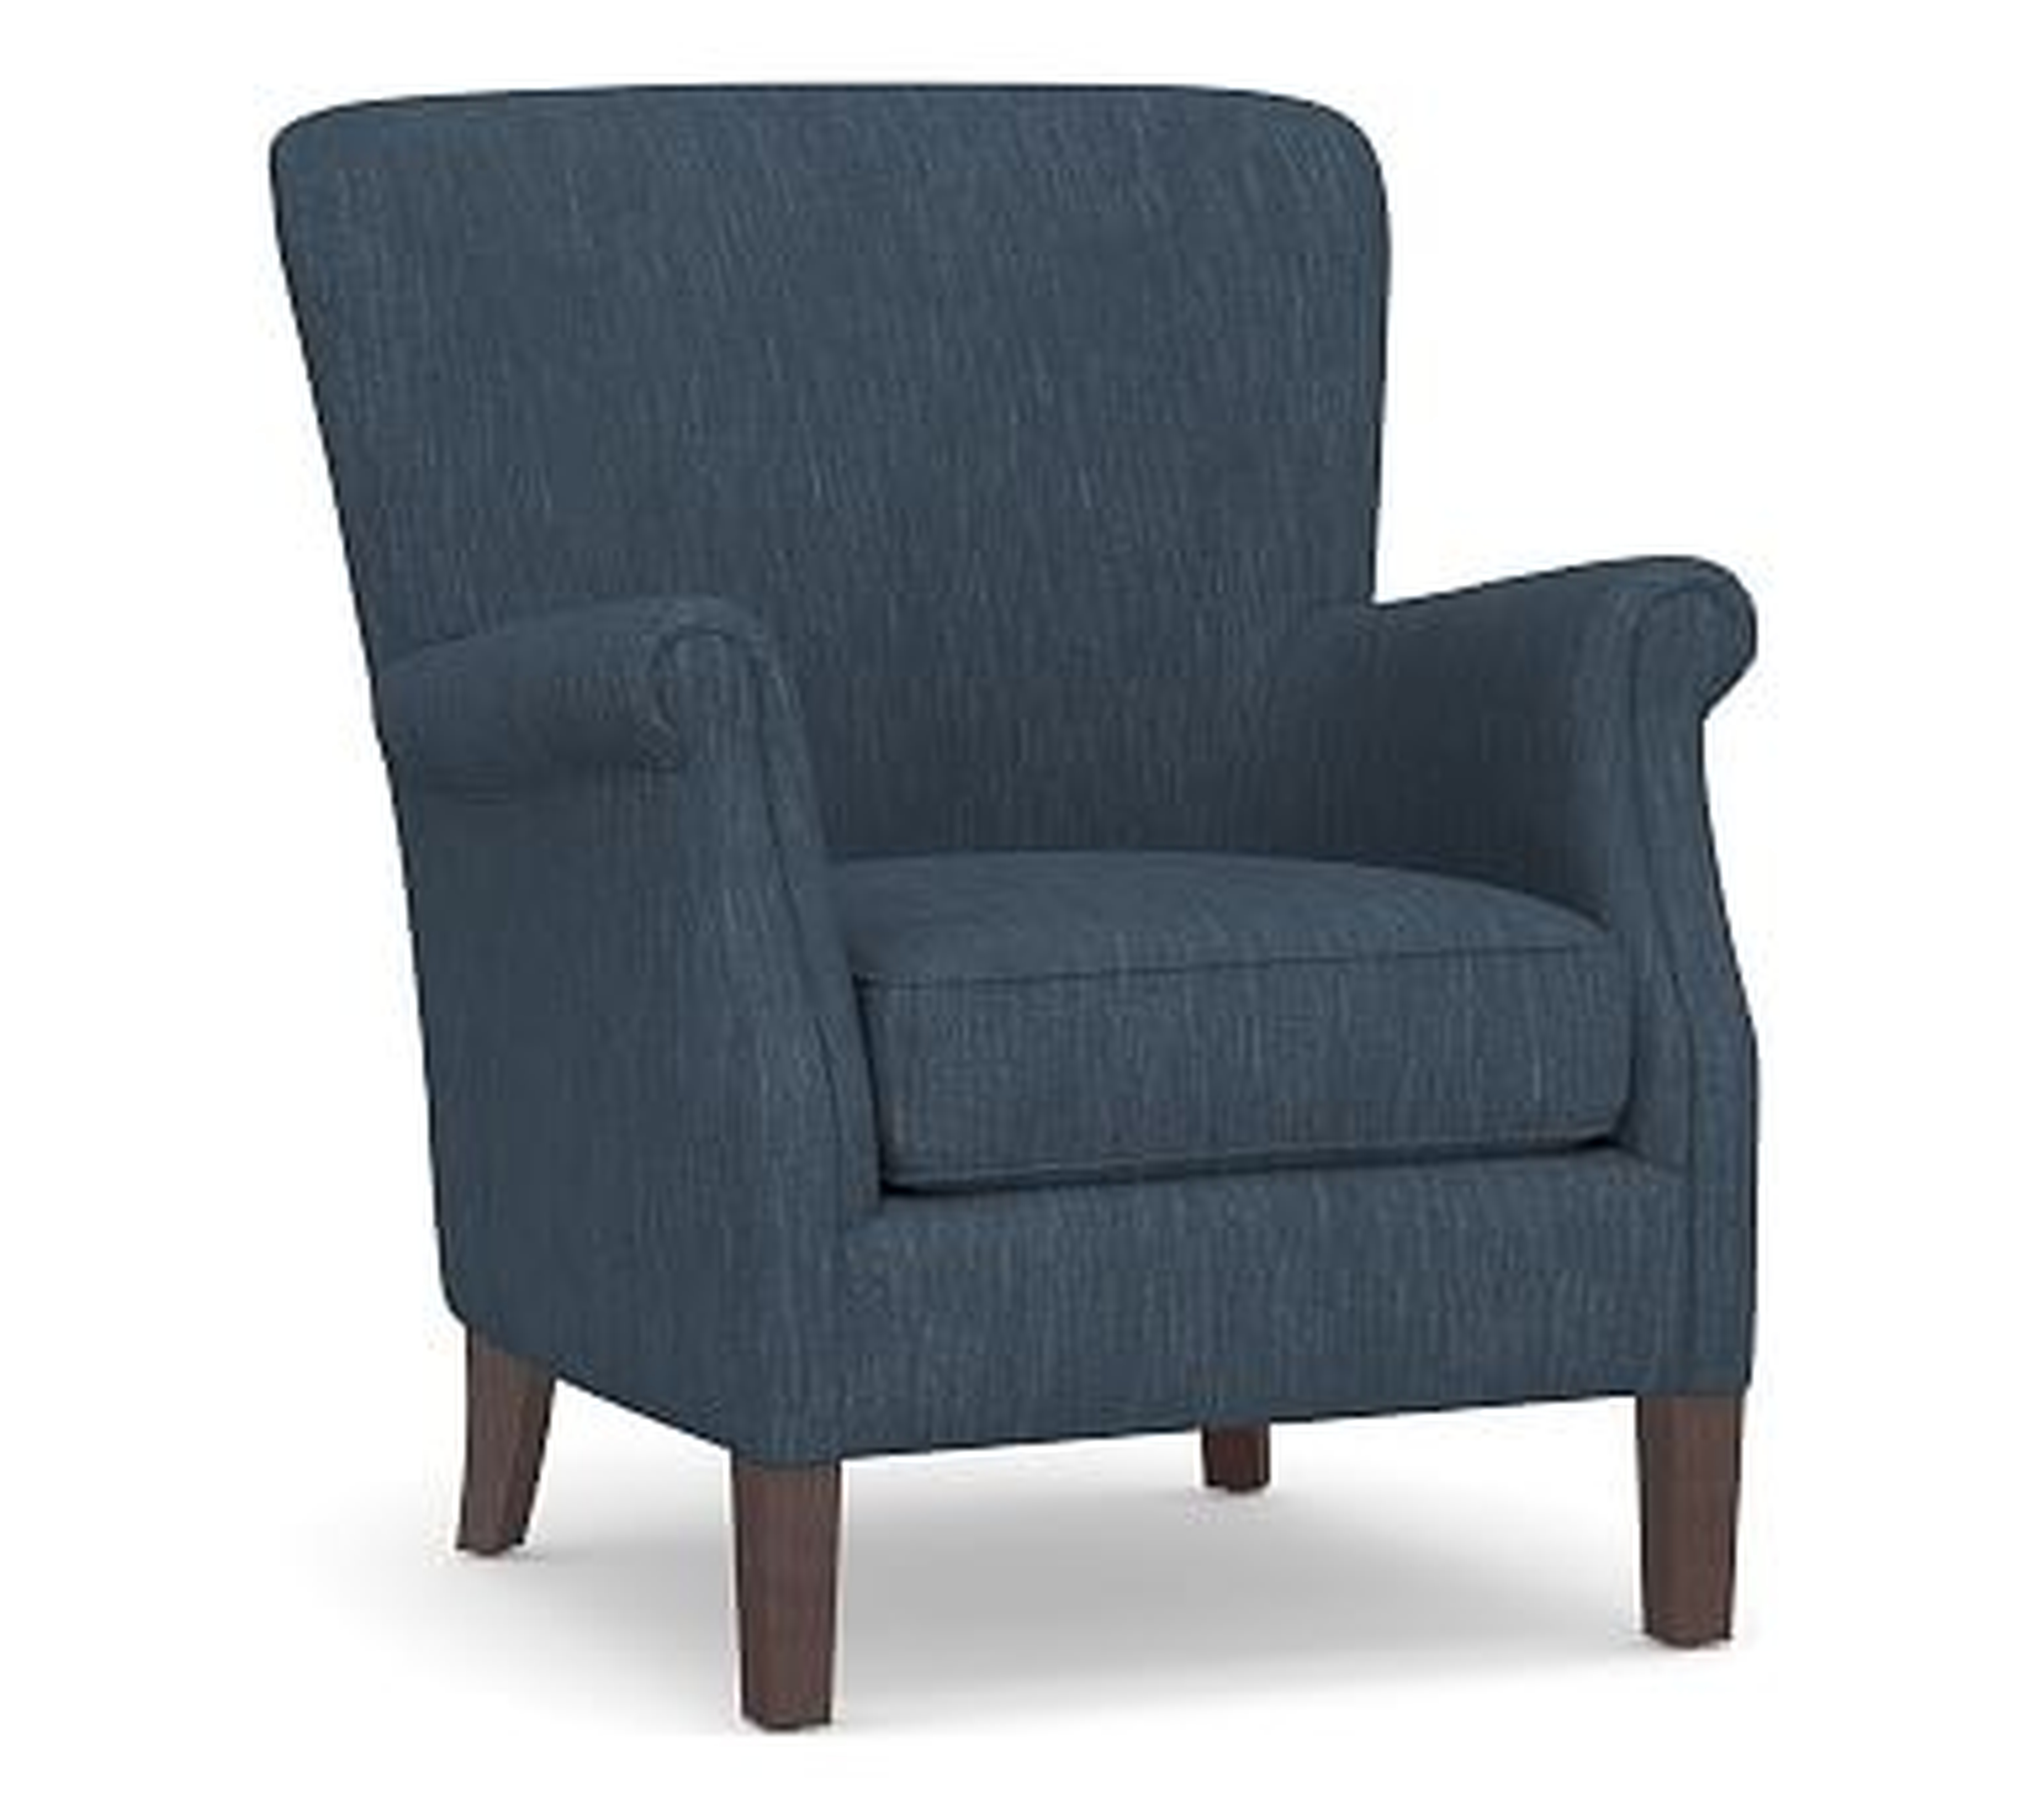 SoMa Minna Upholstered Armchair, Polyester Wrapped Cushions, Performance Heathered Tweed Indigo - Pottery Barn